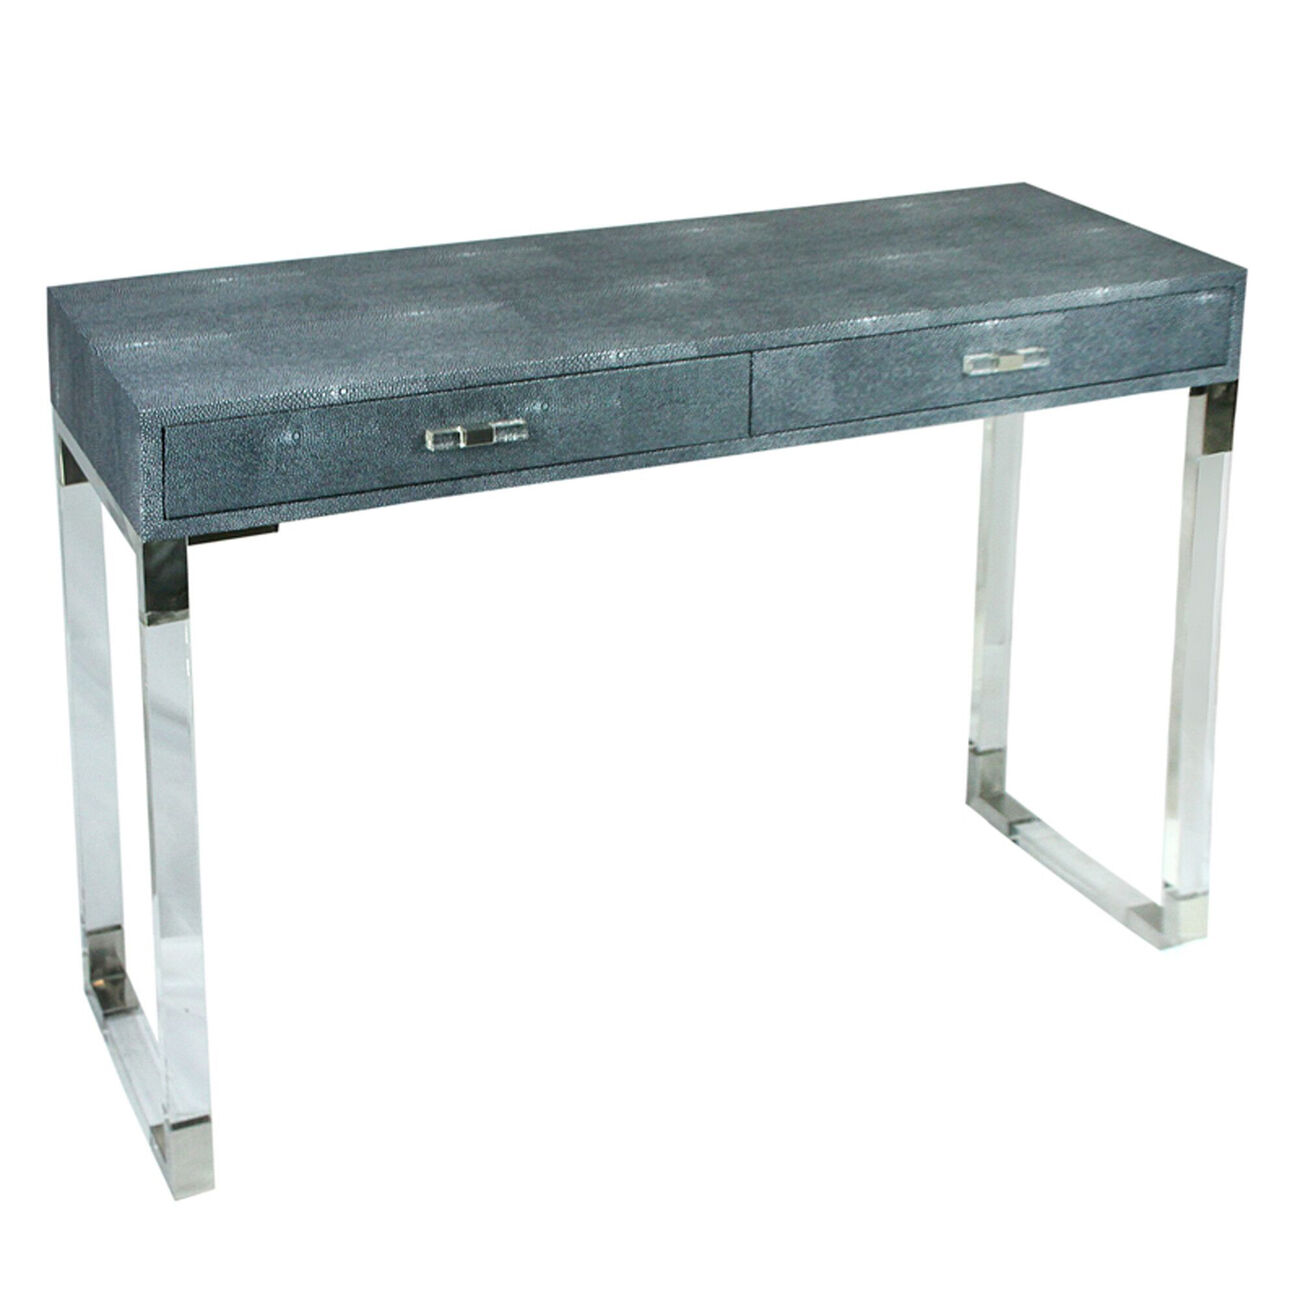 2 Drawer Wooden Console Table with Acrylic Legs, Gray and Chrome